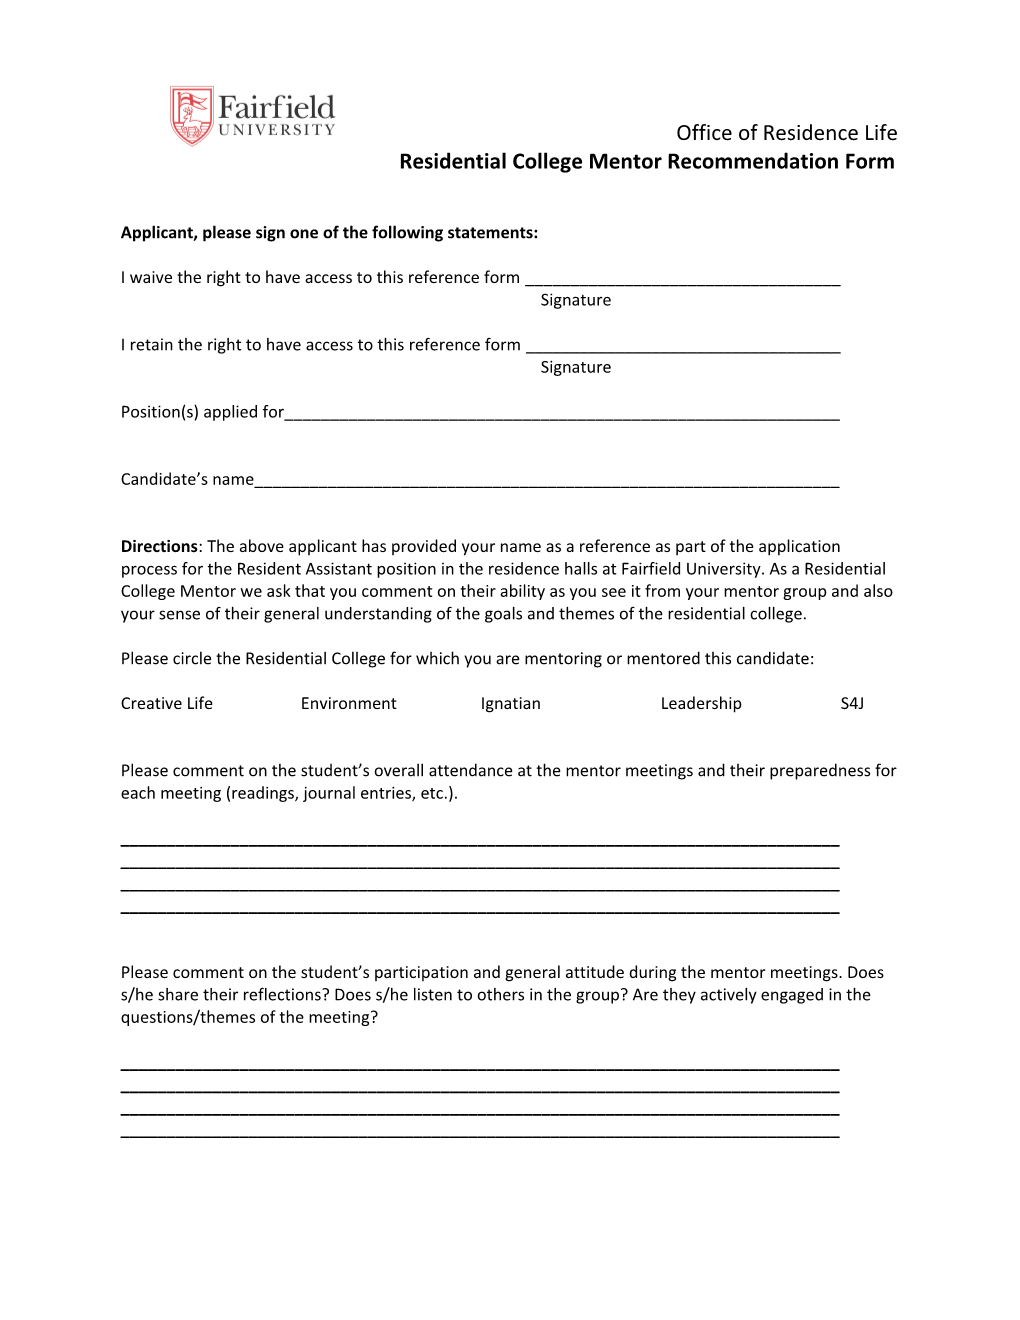 Residential College Mentor Recommendation Form